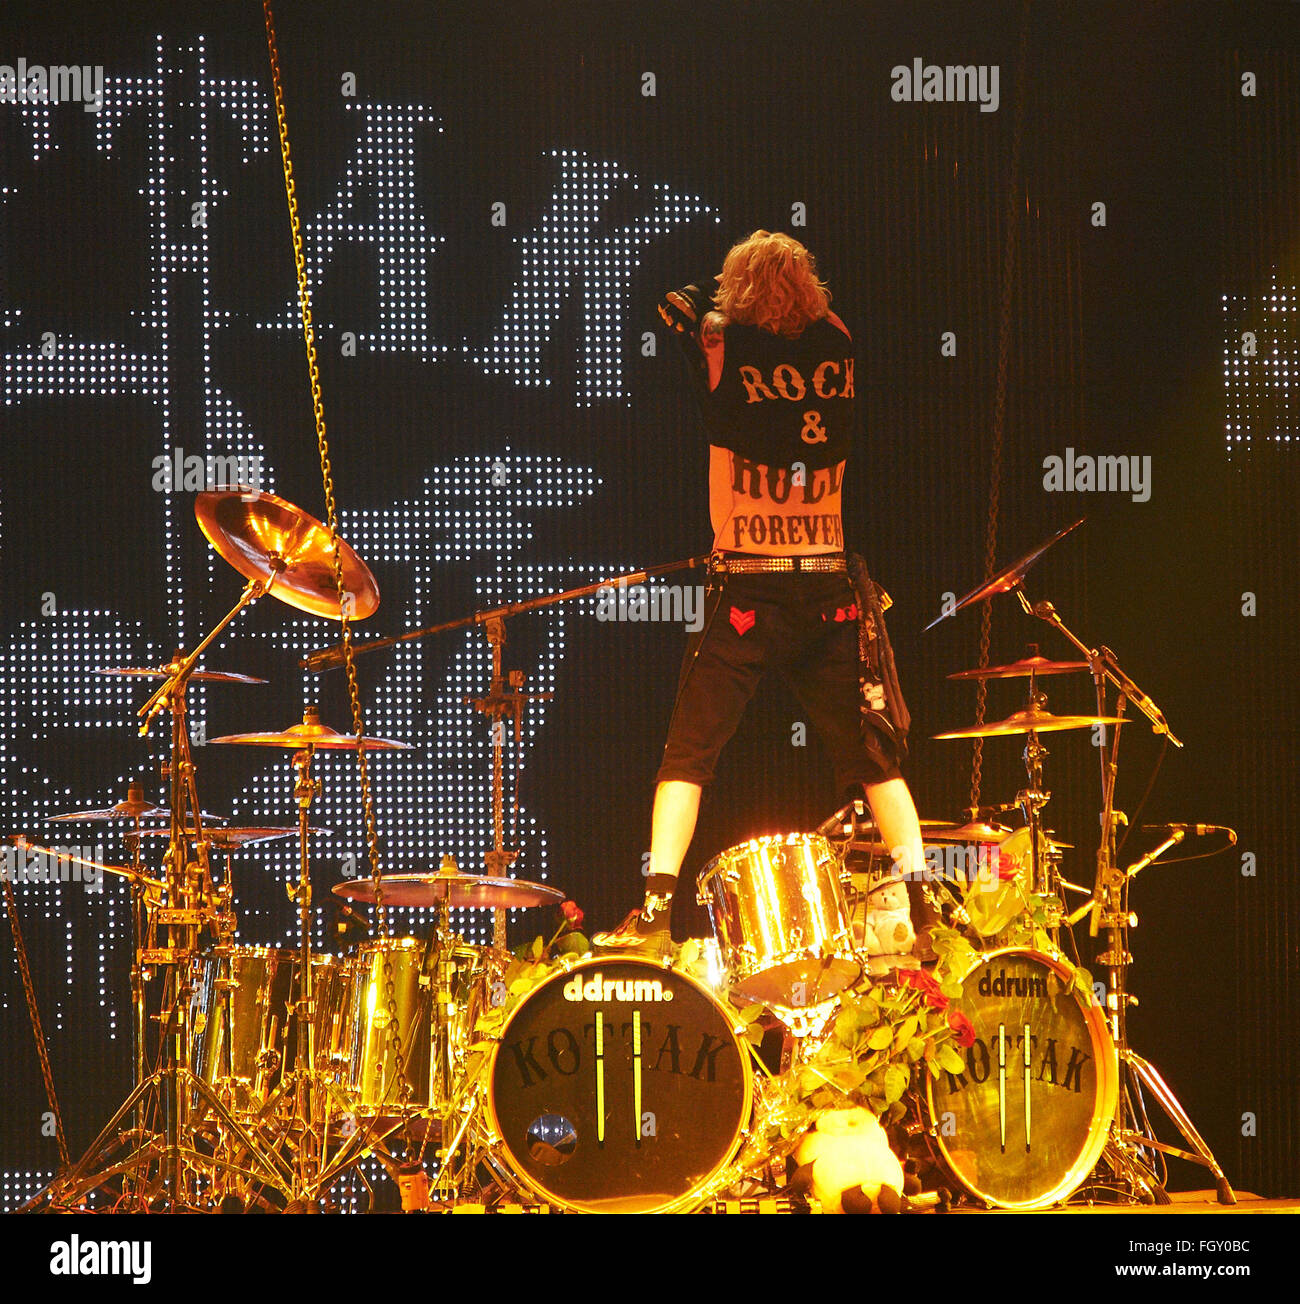 DNIPROPETROVSK, UKRAINE - OCTOBER 31, 2012: Drummer James Kottak takes off his t-shirt on the stage during 'Sting Tour 2012' Stock Photo